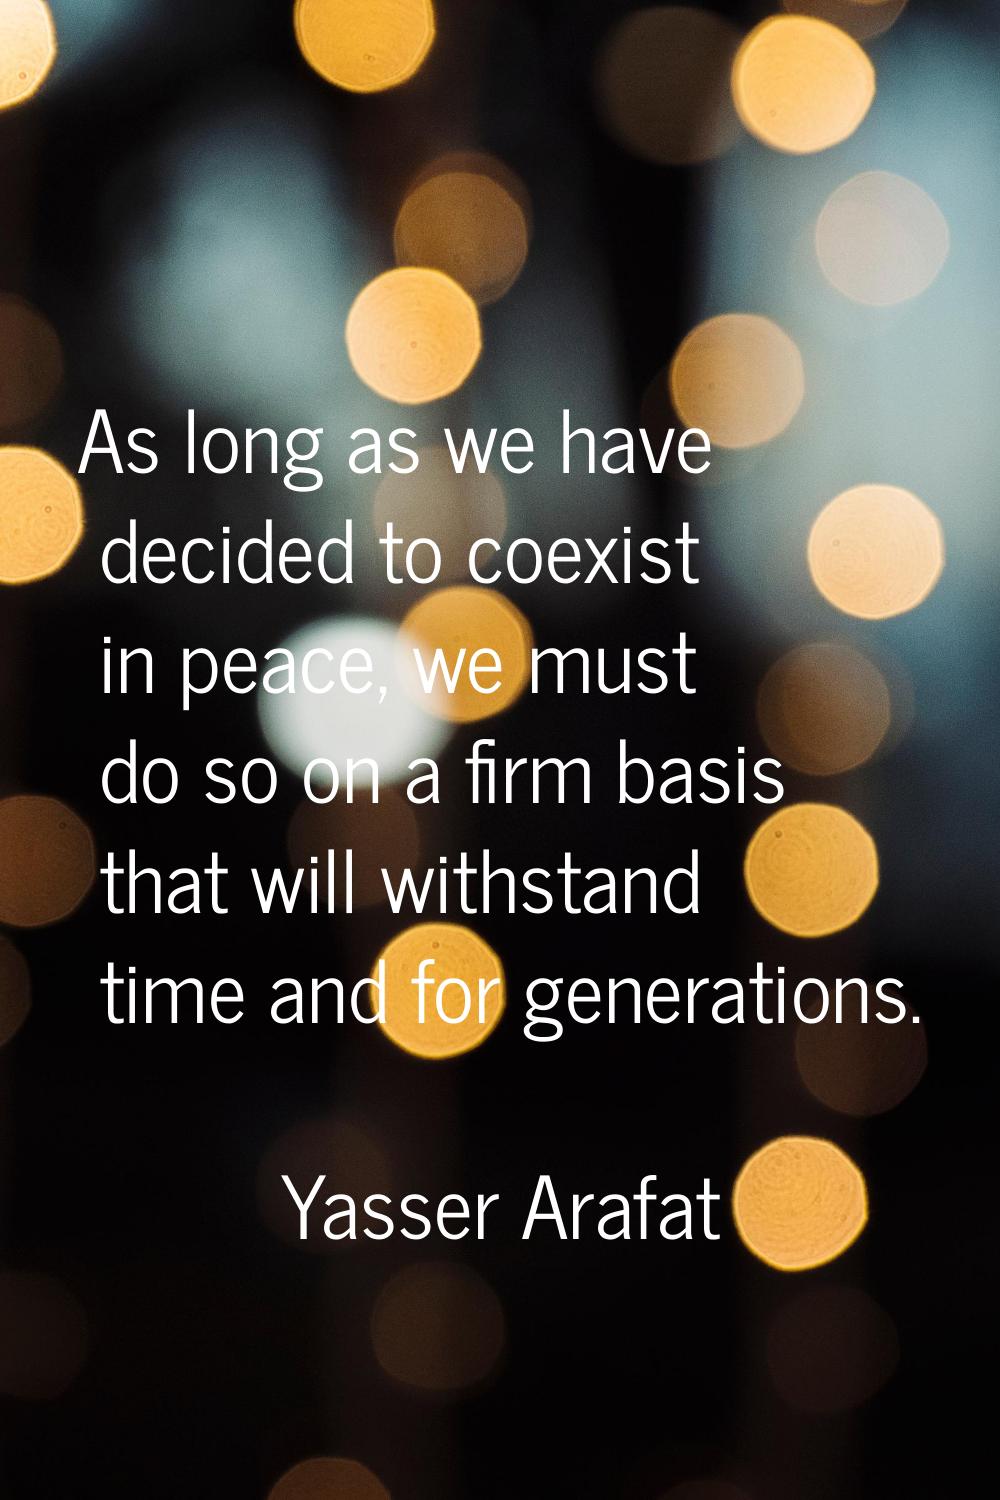 As long as we have decided to coexist in peace, we must do so on a firm basis that will withstand t